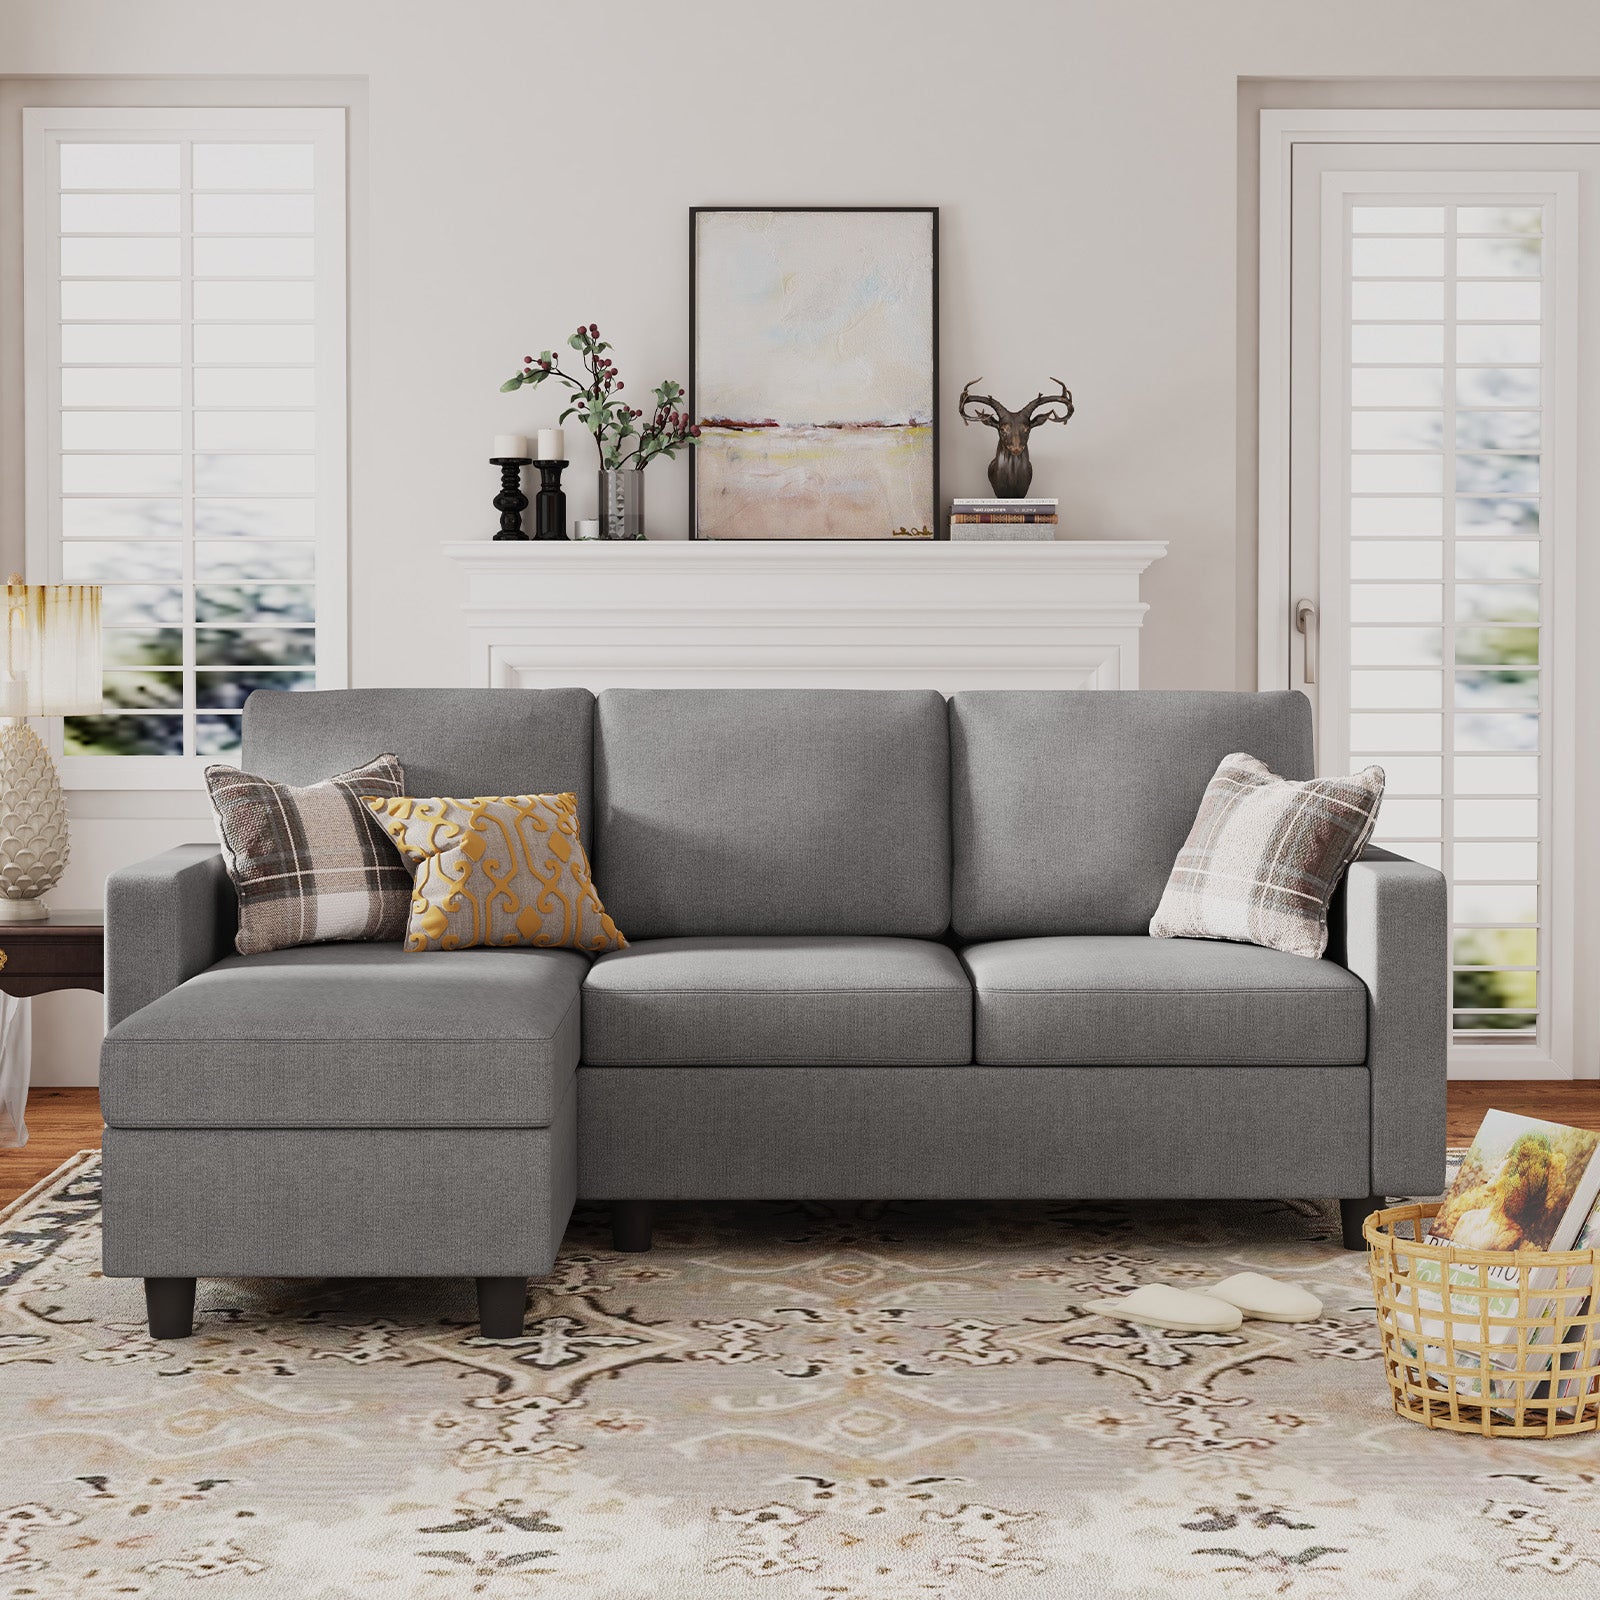 Honbay L-Shaped Gray Upholstered Sectional Comfortable Soft Sofa Couch 